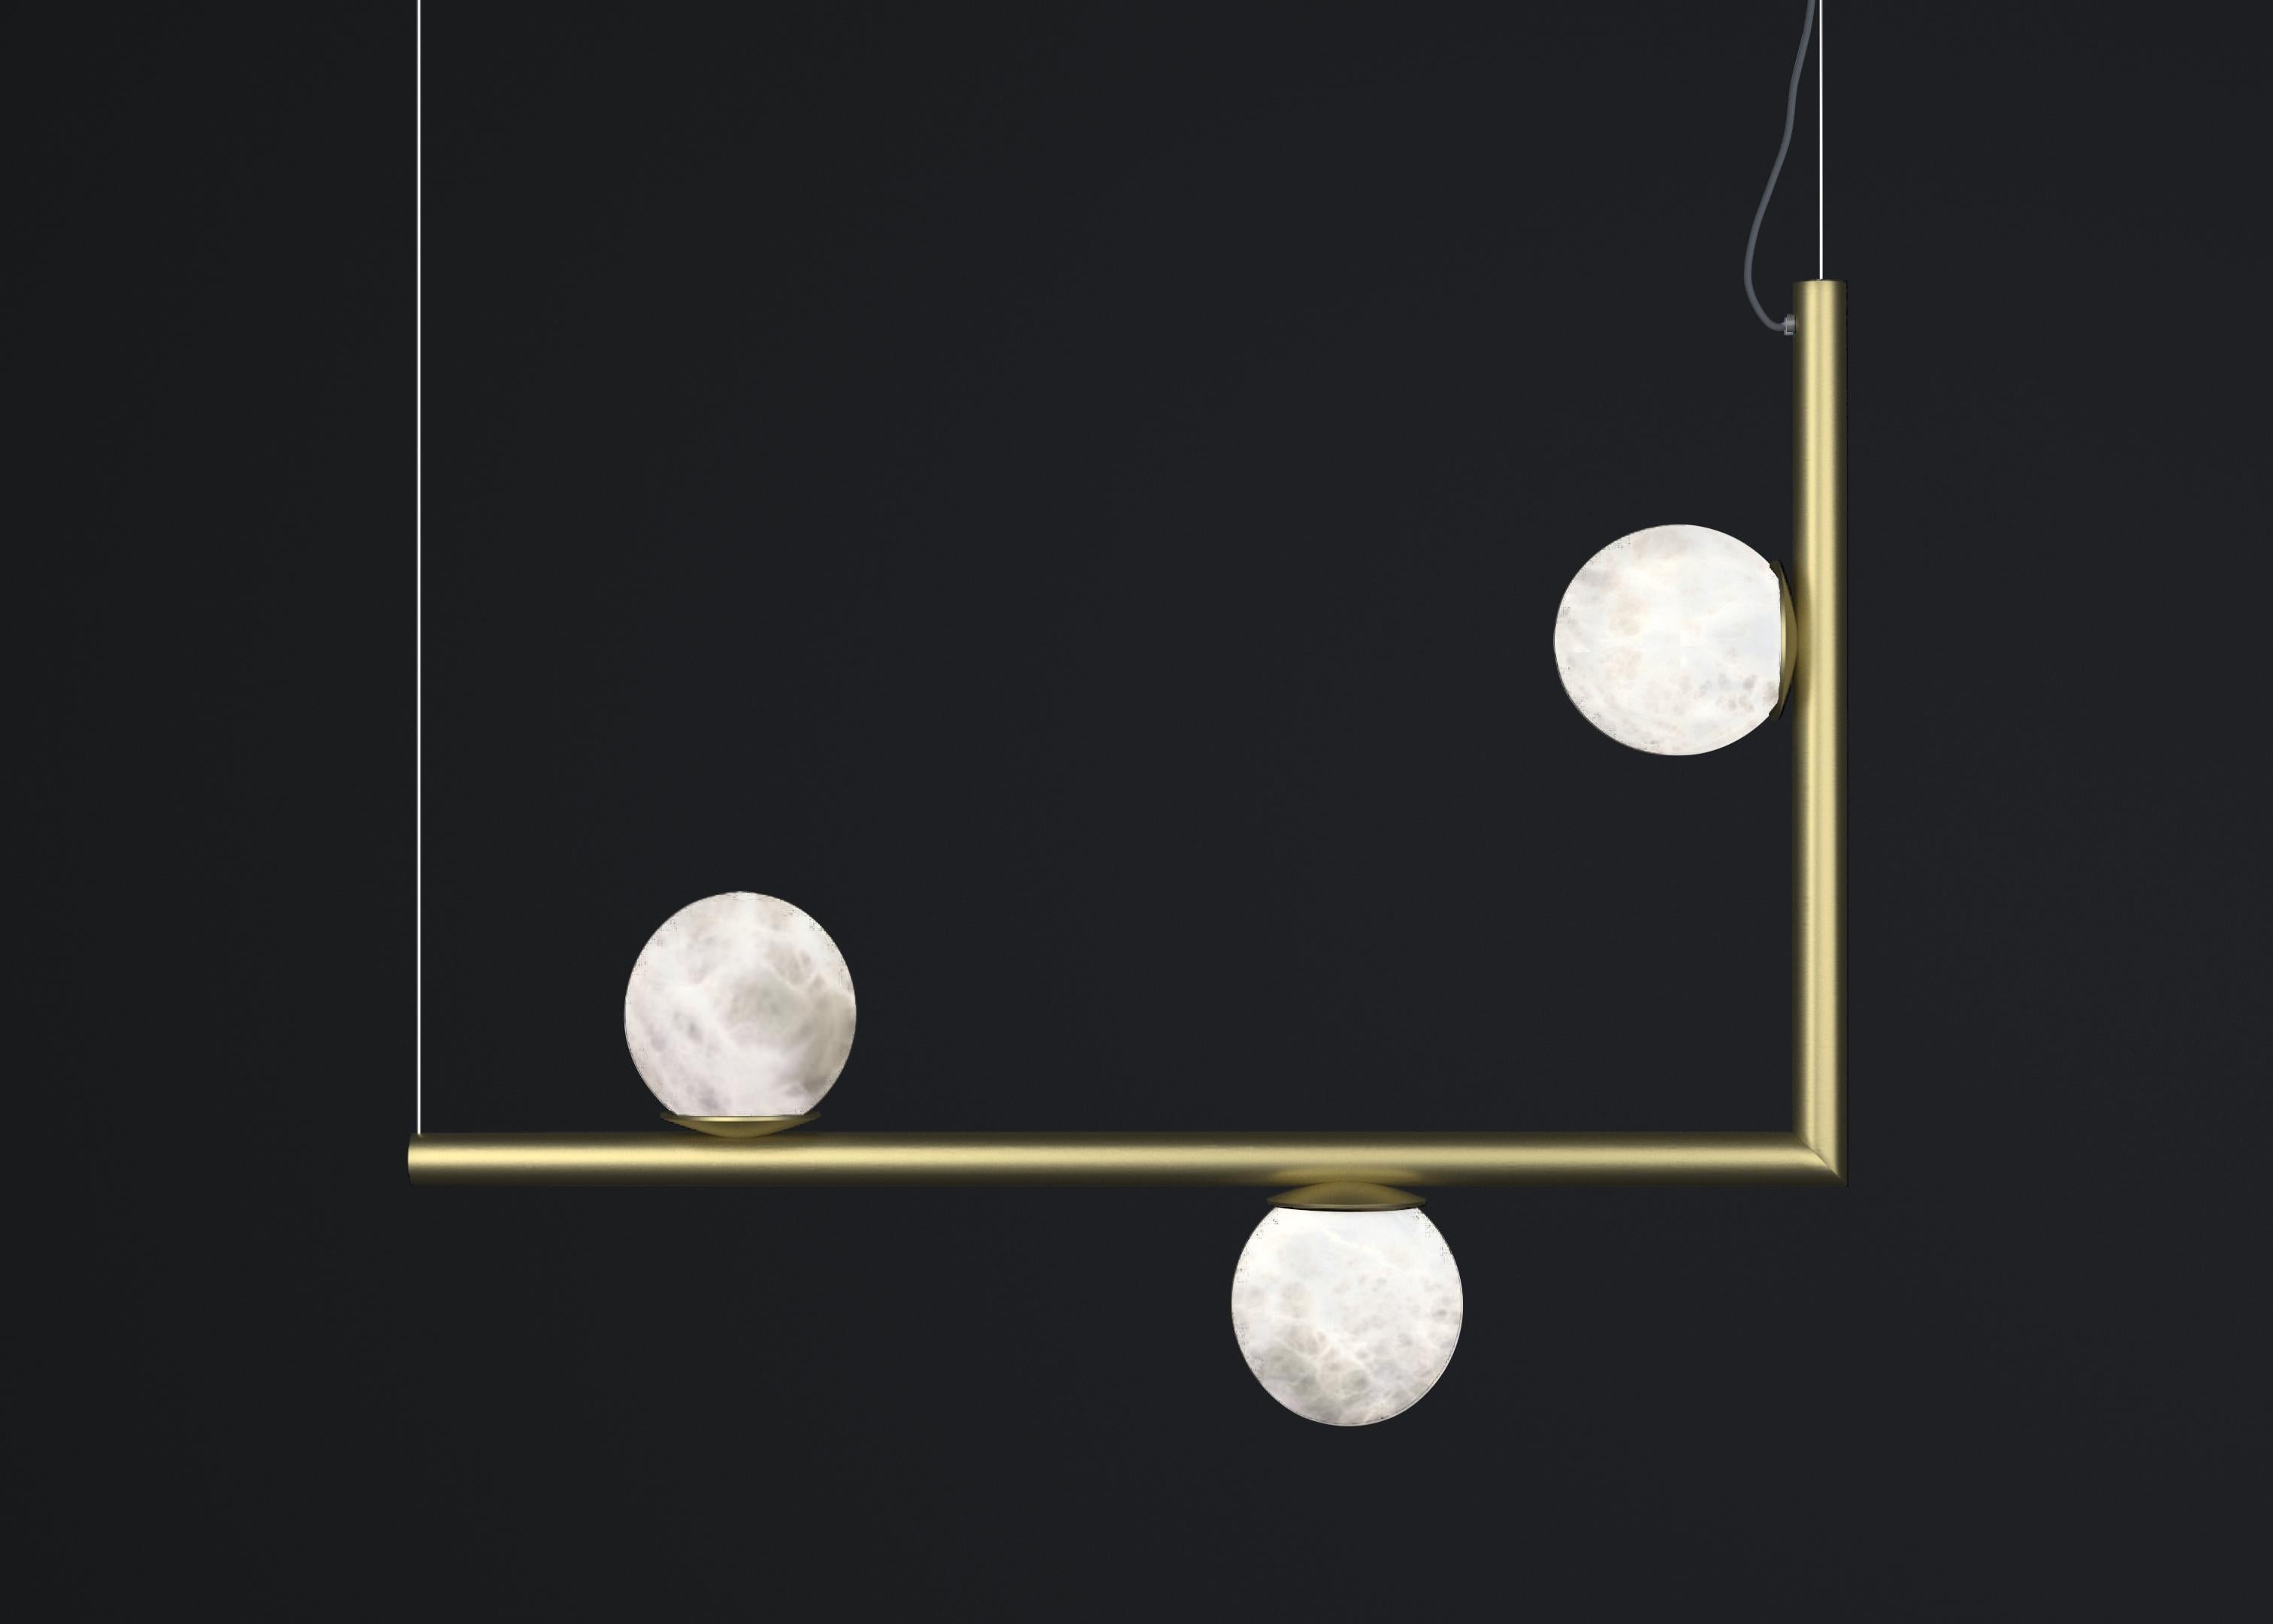 Ofione 1 Brushed Brass Pendant Lamp by Alabastro Italiano
Dimensions: D 15 x W 85 x H 64 cm.
Materials: White alabaster and brass.

Available in different finishes: Shiny Silver, Bronze, Brushed Brass, Ruggine of Florence, Brushed Burnished, Shiny